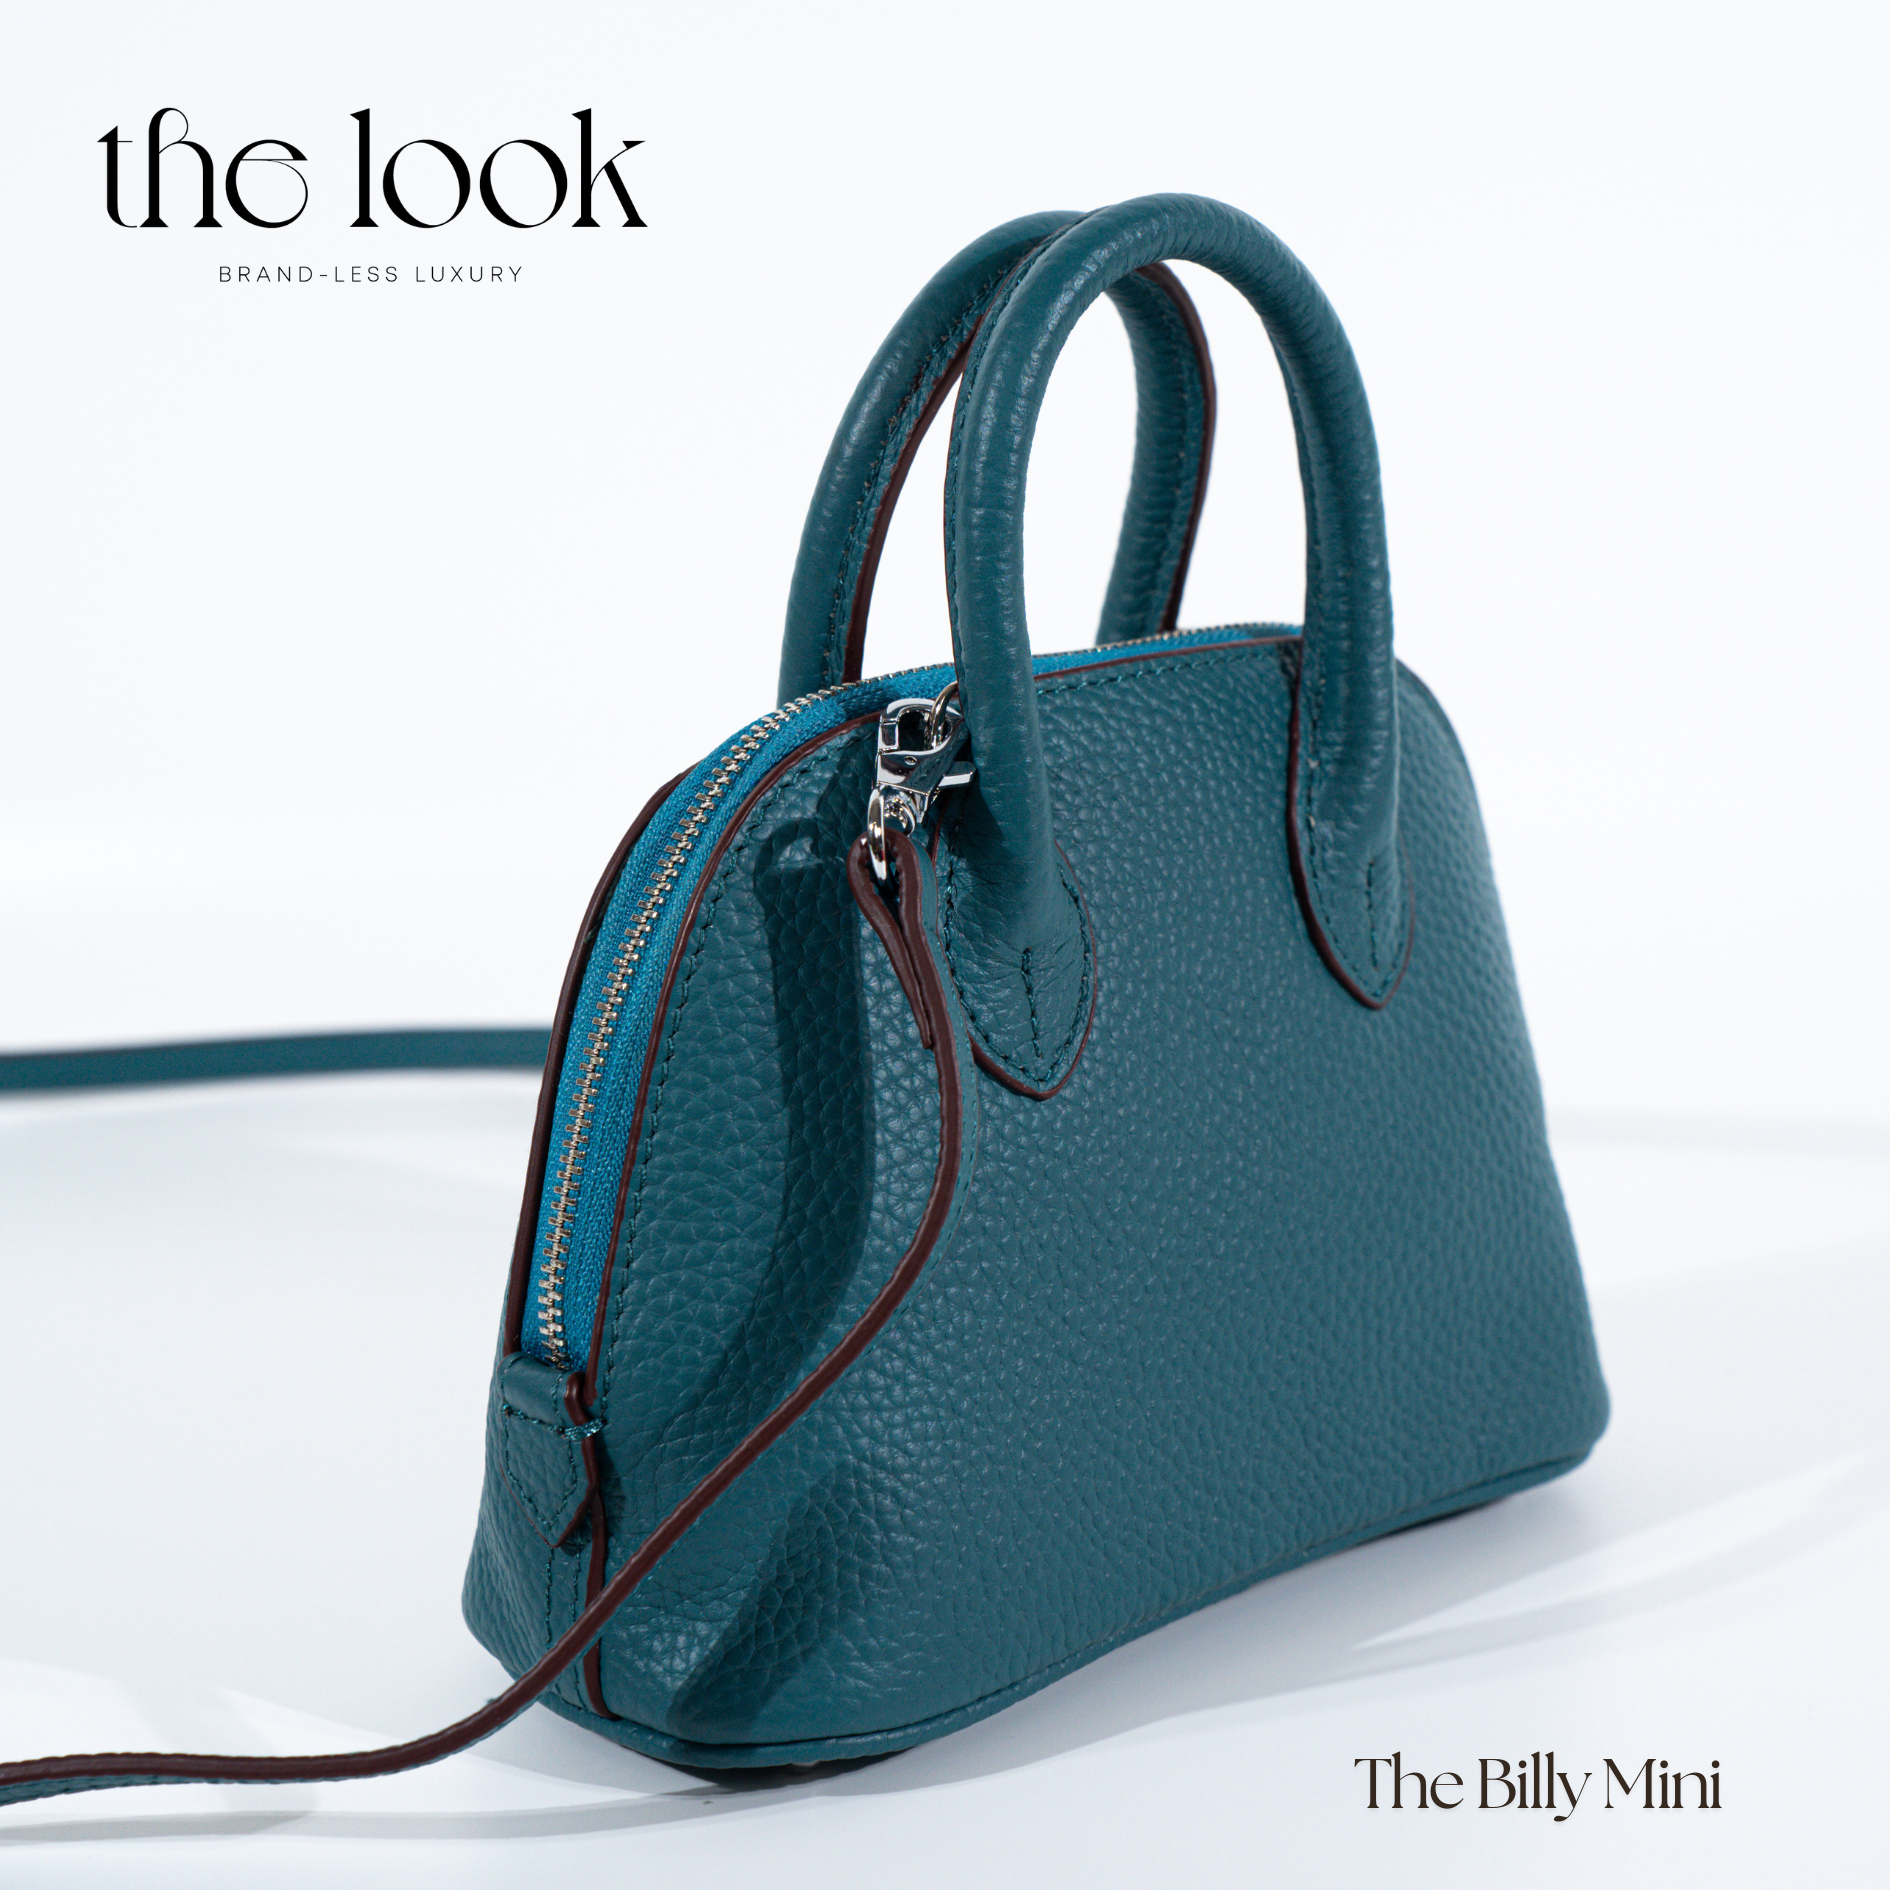 The Mini Billy Dome Crossbody in Deep Sea by The Look